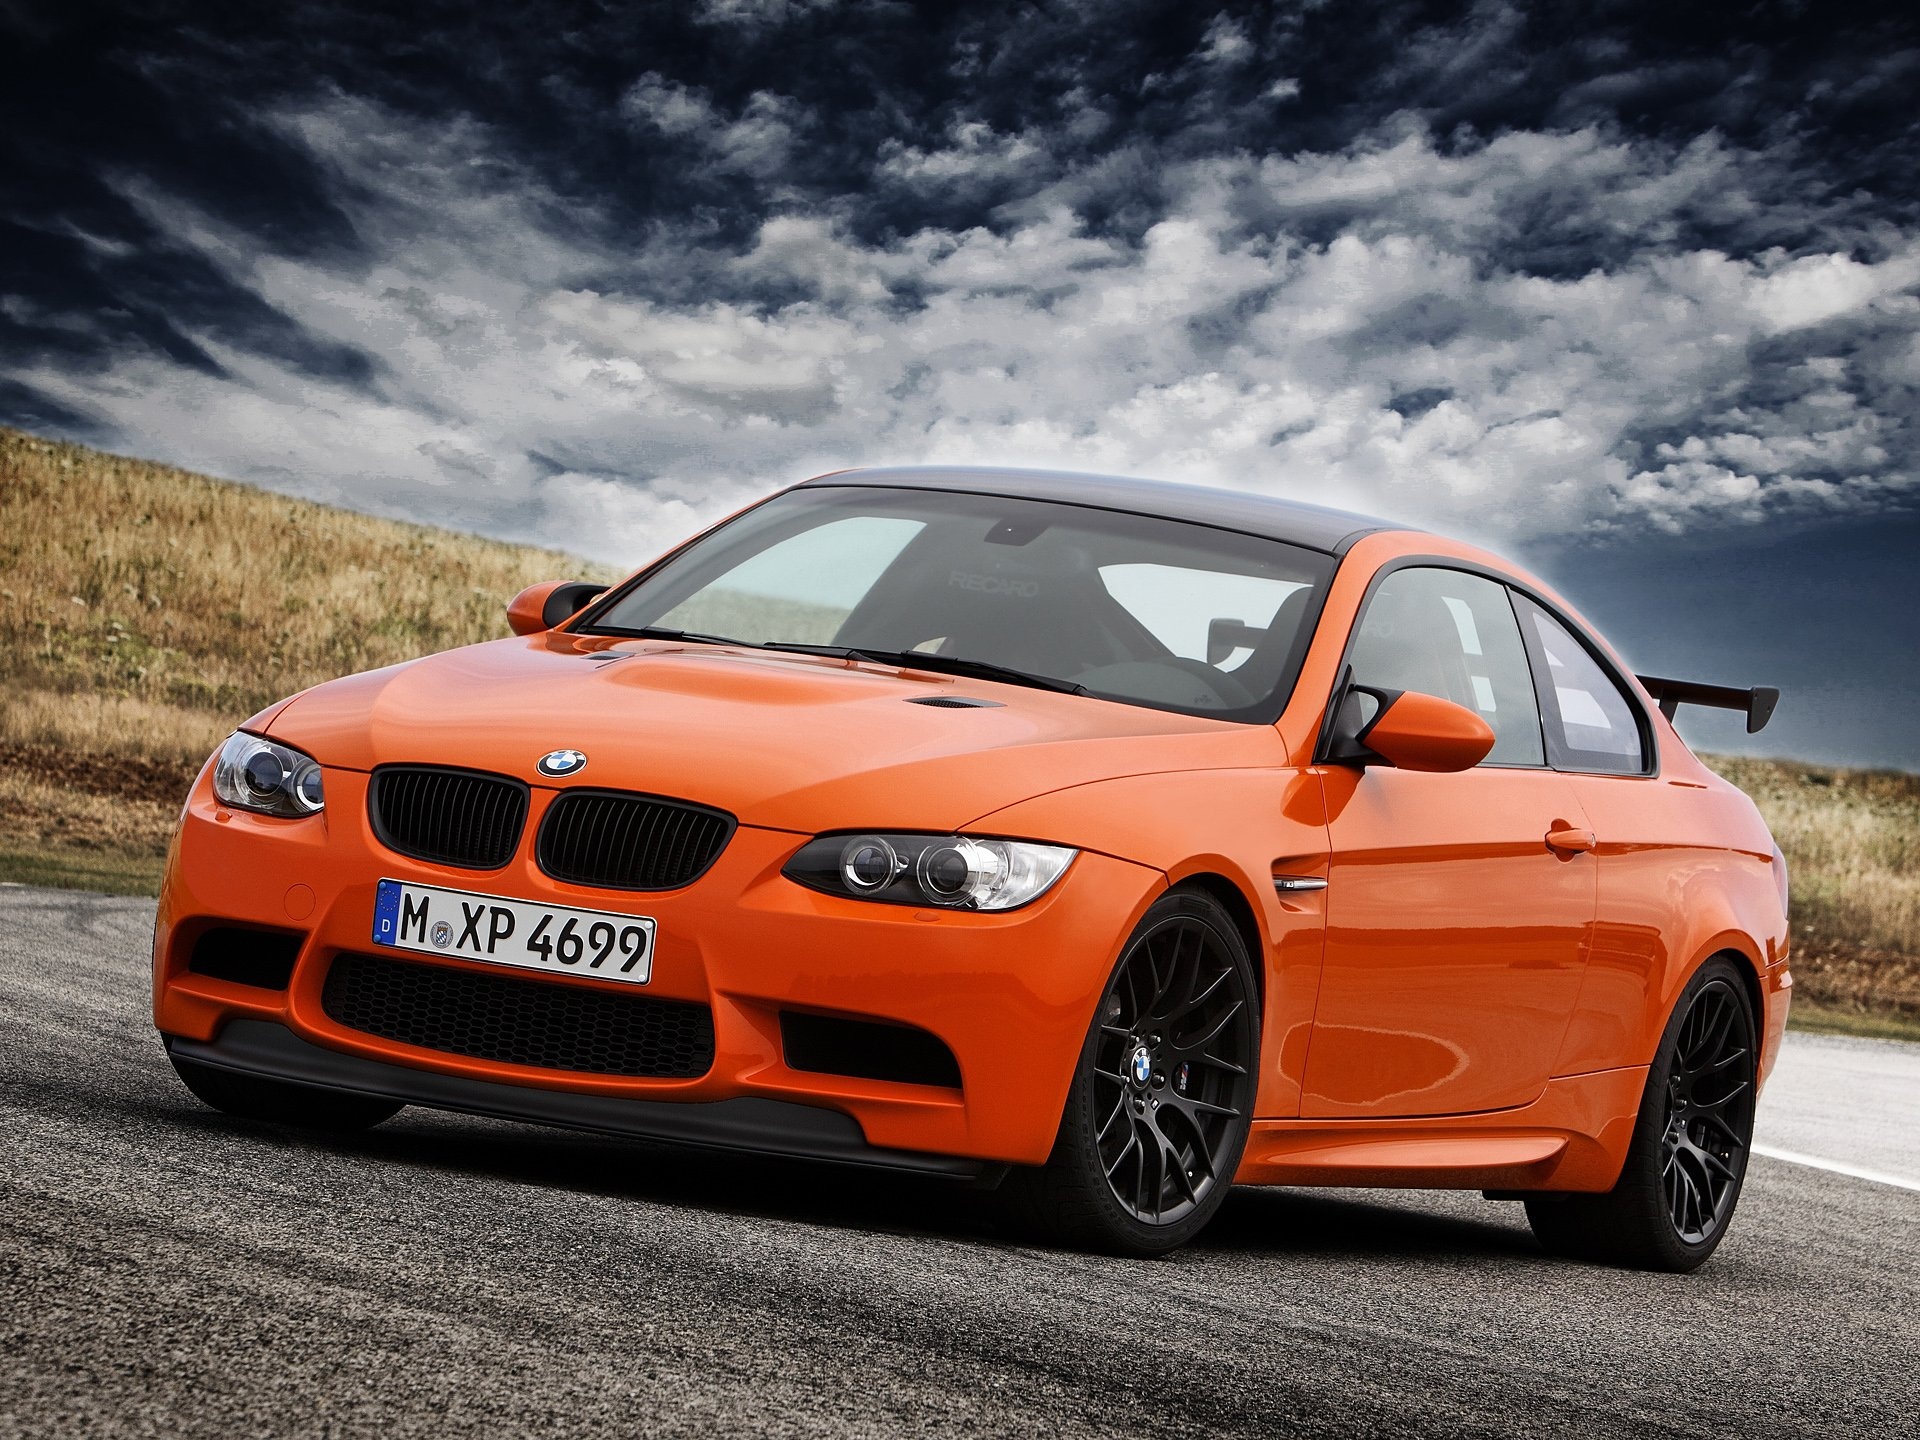 BMW M3 GTS, HD wallpapers and backgrounds, Racetrack-ready, Performance-driven, 1920x1440 HD Desktop